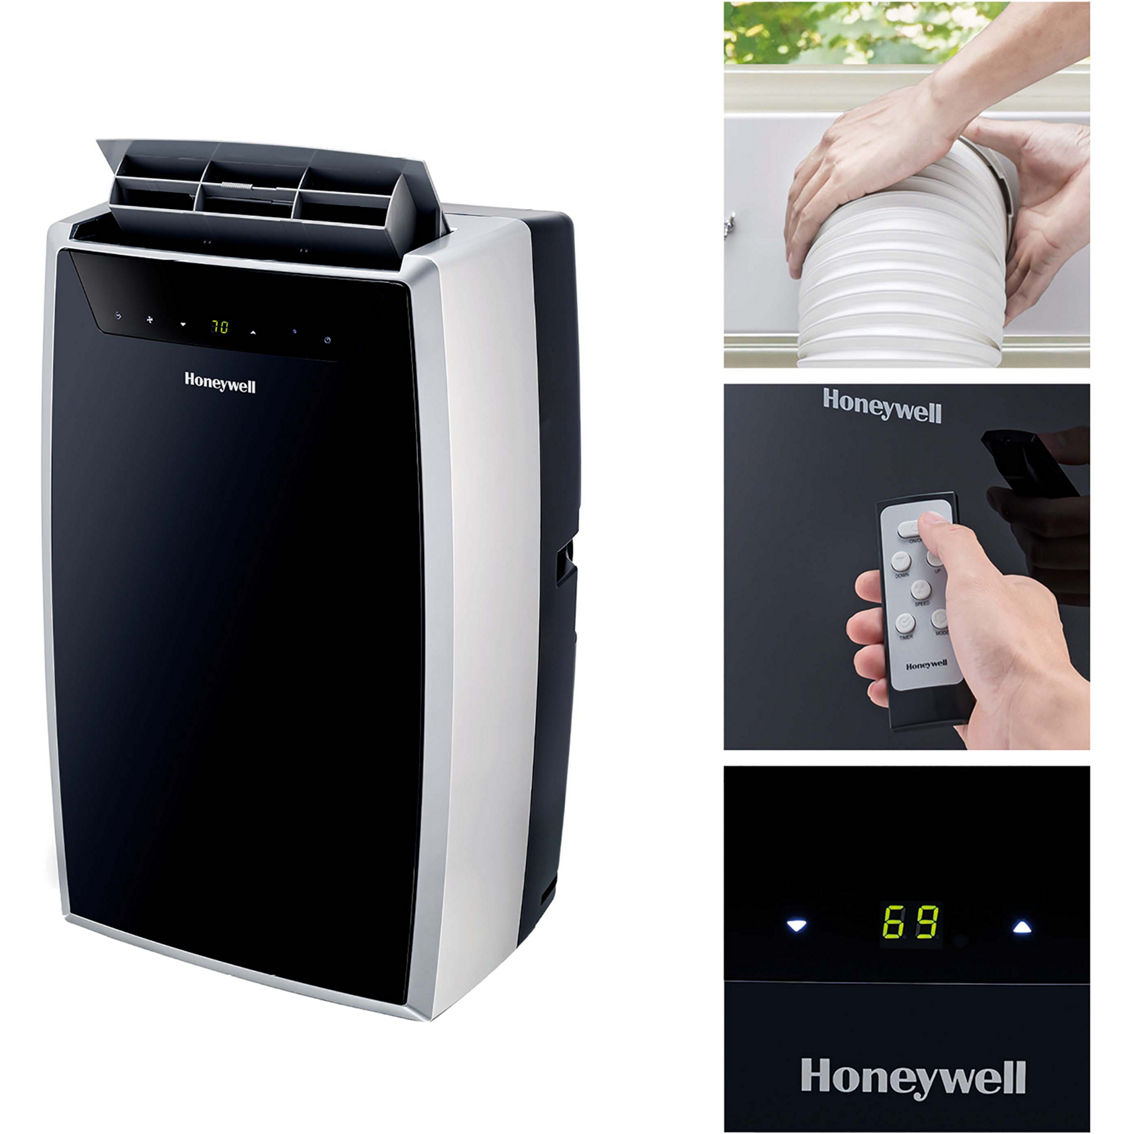 Honeywell 14,000 BTU Heat and Cool Portable Air Conditioner, Dehumidifier and Fan - Image 2 of 9